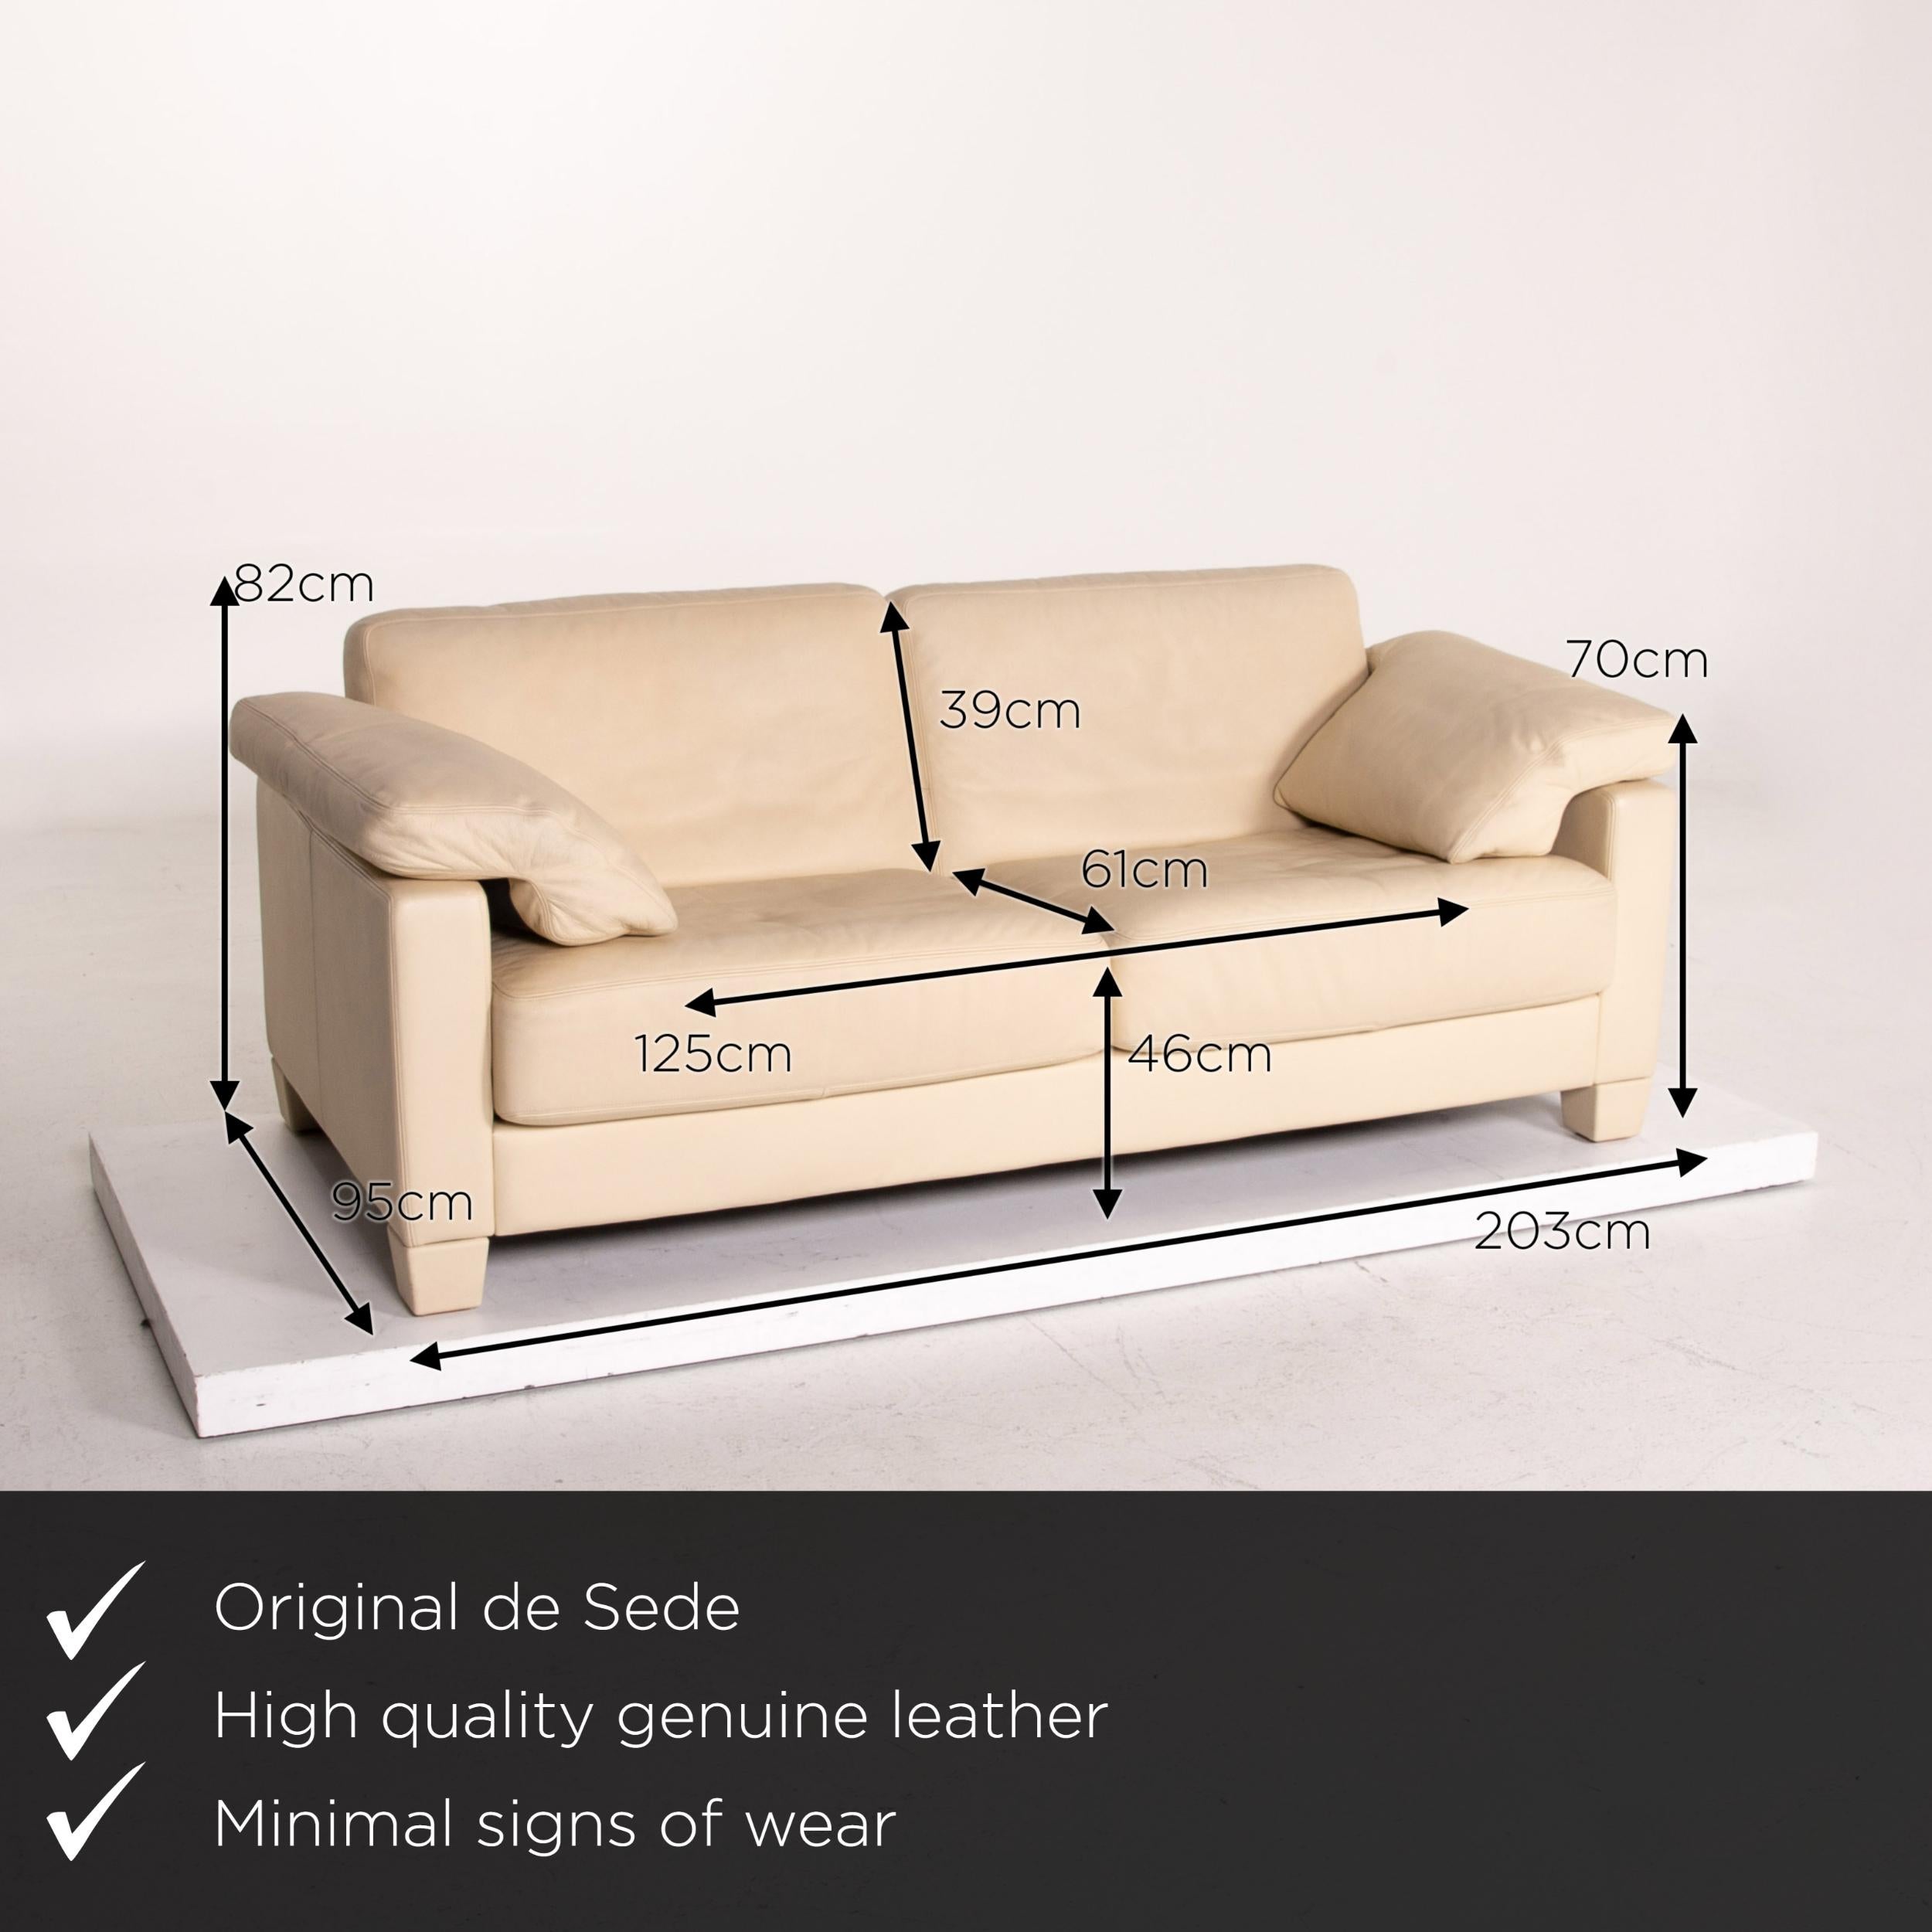 We present to you a De Sede ds 70 leather sofa beige three-seat couch.
   
 

 Product measurements in centimeters:
 

Depth 95
Width 203
Height 82
Seat height 46
Rest height 70
Seat depth 61
Seat width 125
Back height 39.